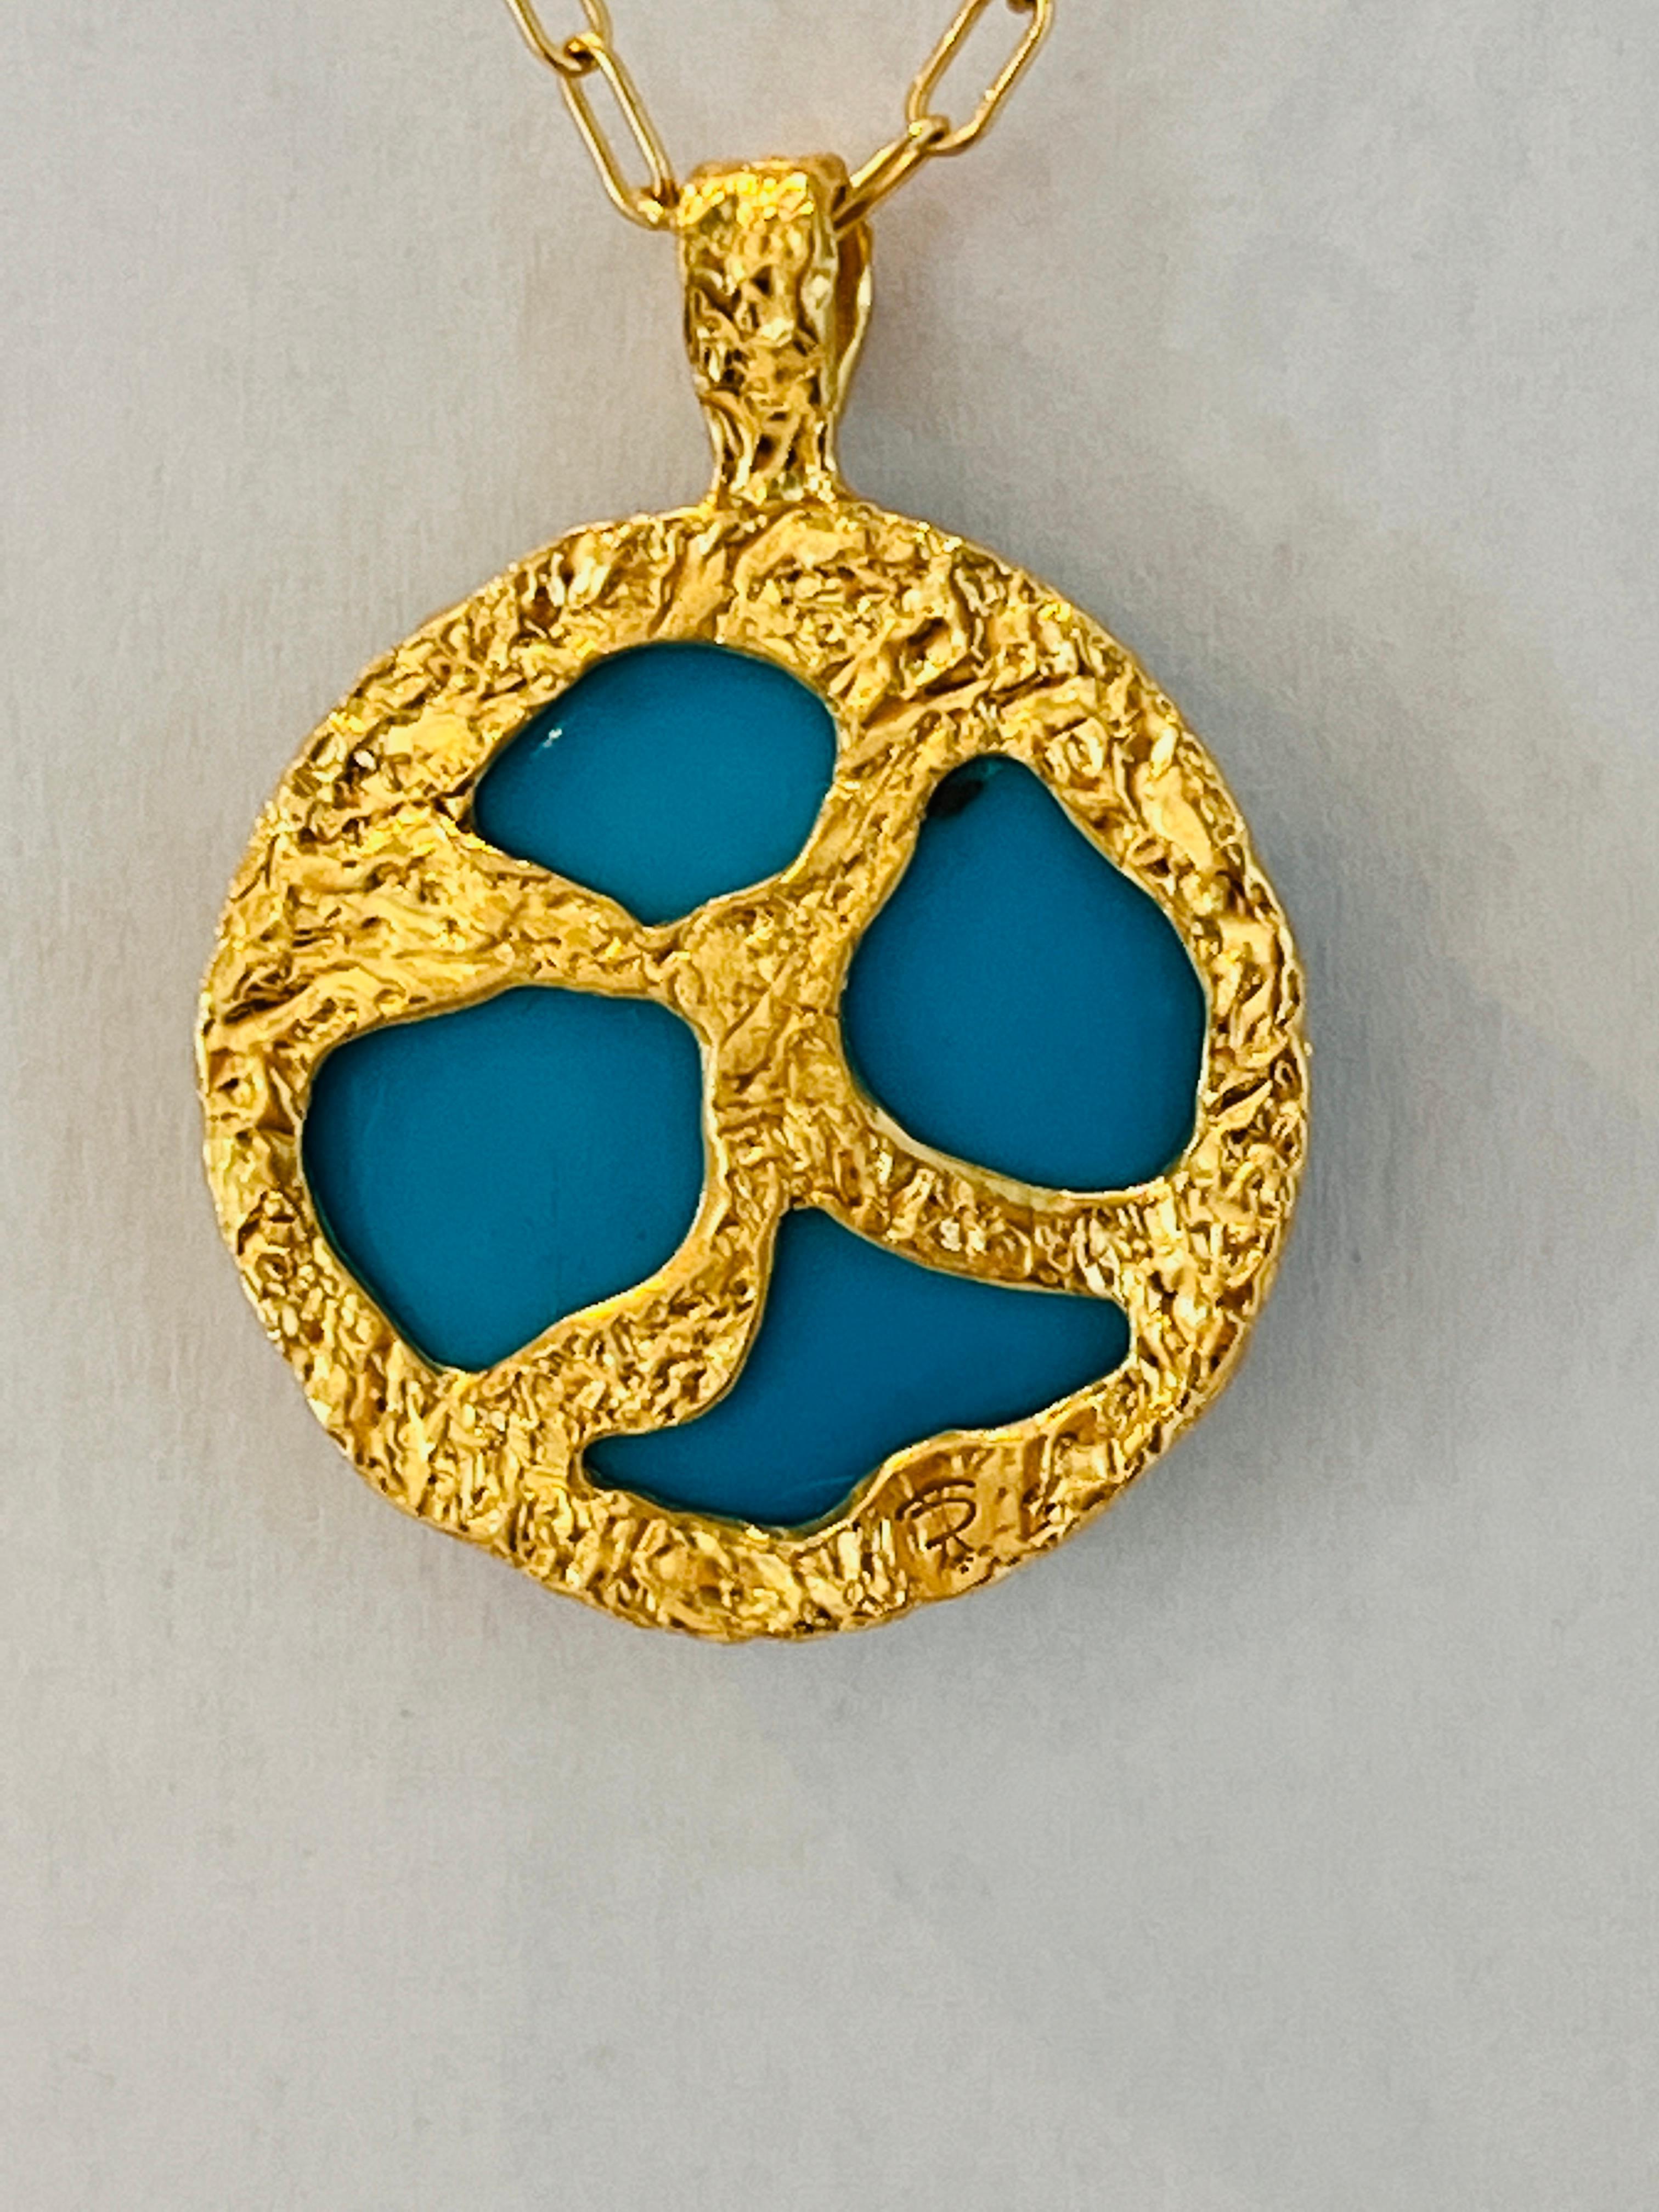 Turquoise Handmade Pendant in 22k Gold, by Tagili 2